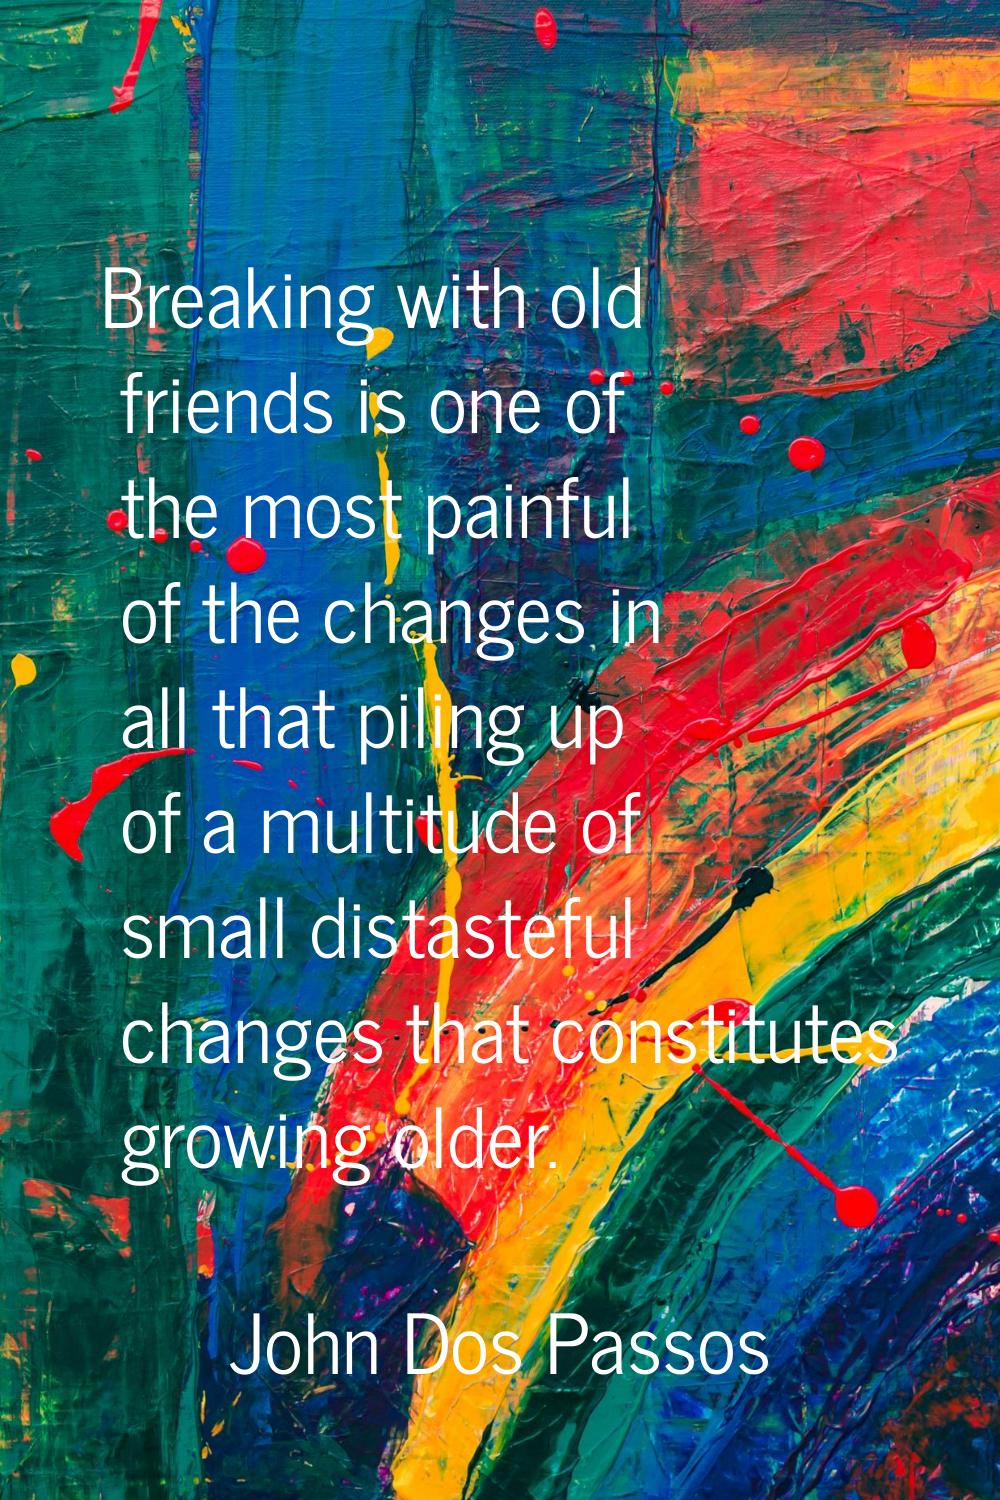 Breaking with old friends is one of the most painful of the changes in all that piling up of a mult